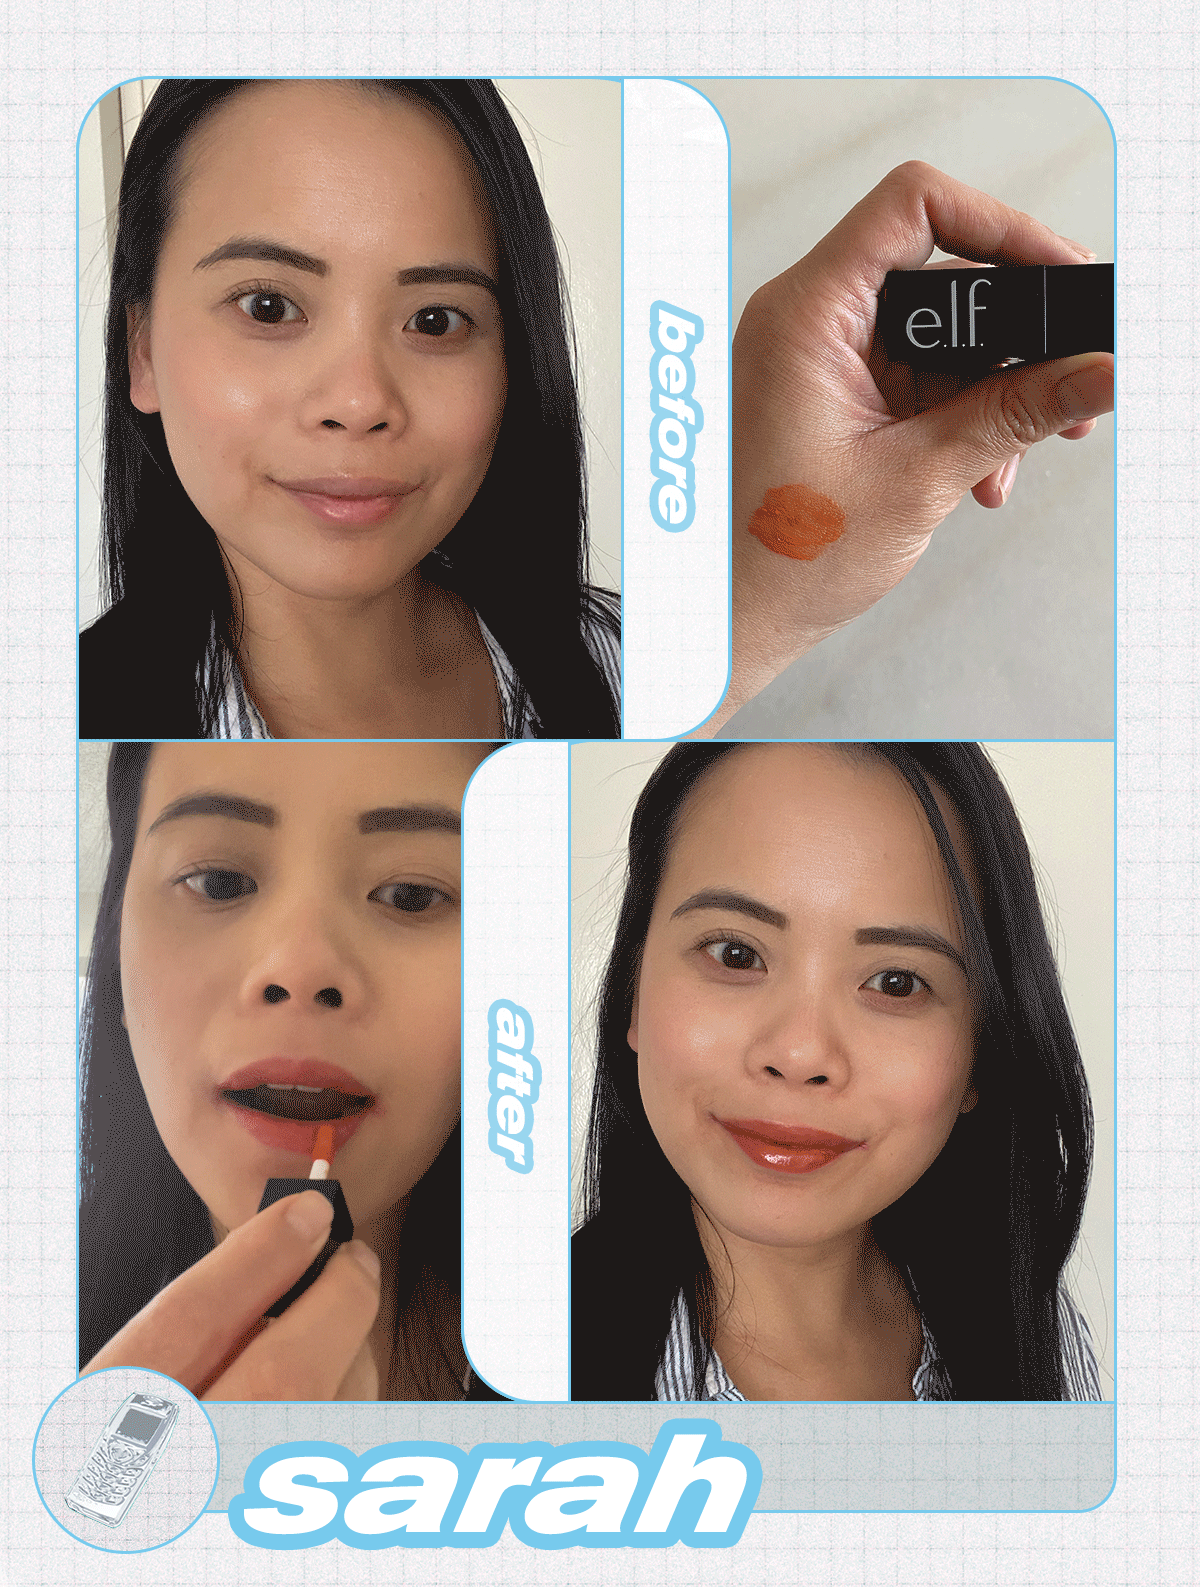 elf-glossy-lip-stain-review-298550-1648073518594-main